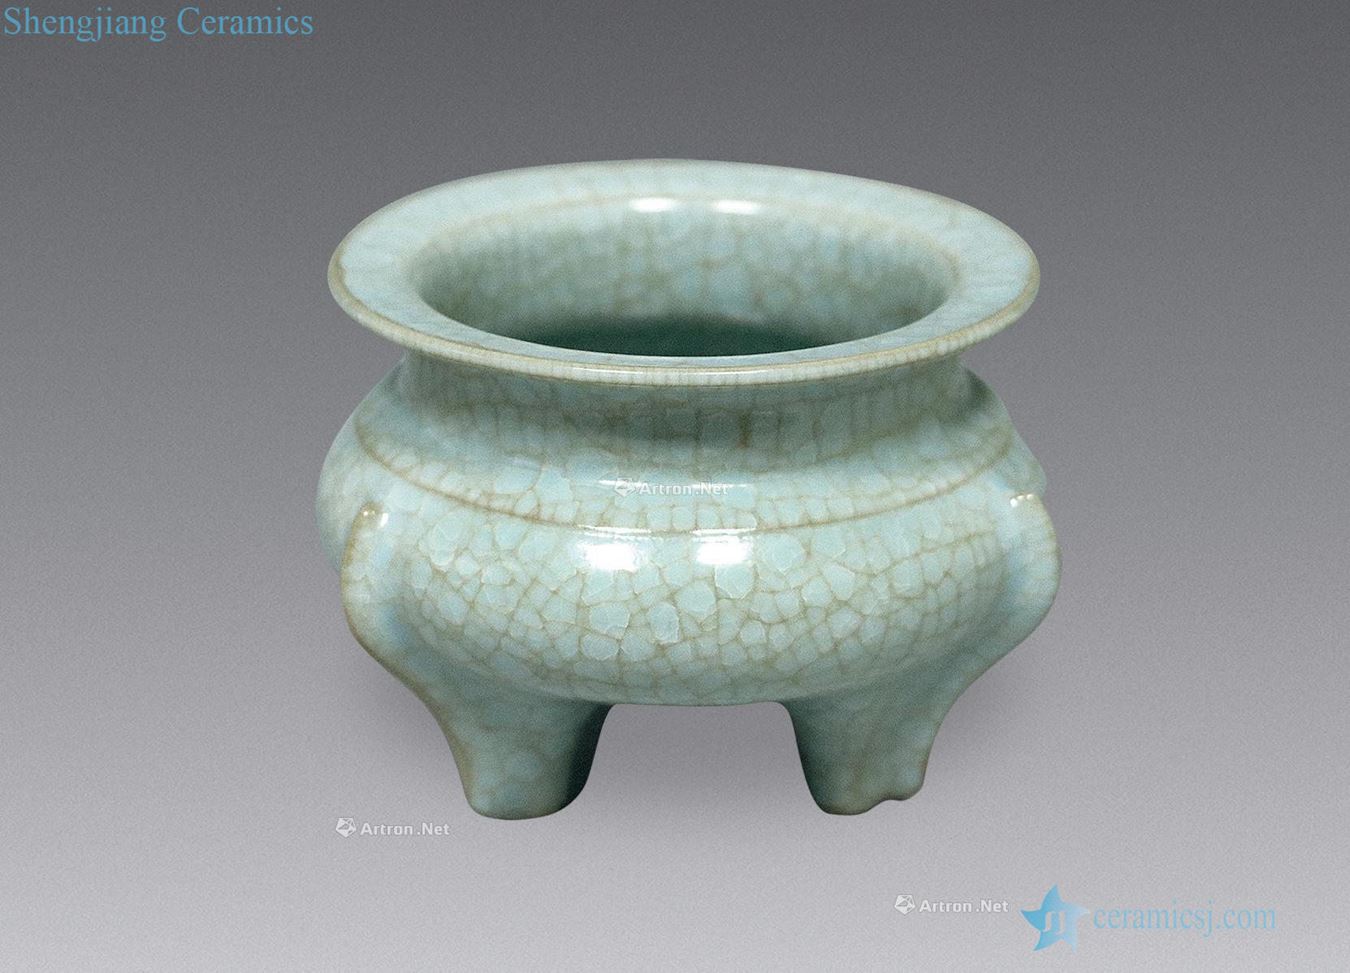 The song dynasty Your kiln ice crack by furnace